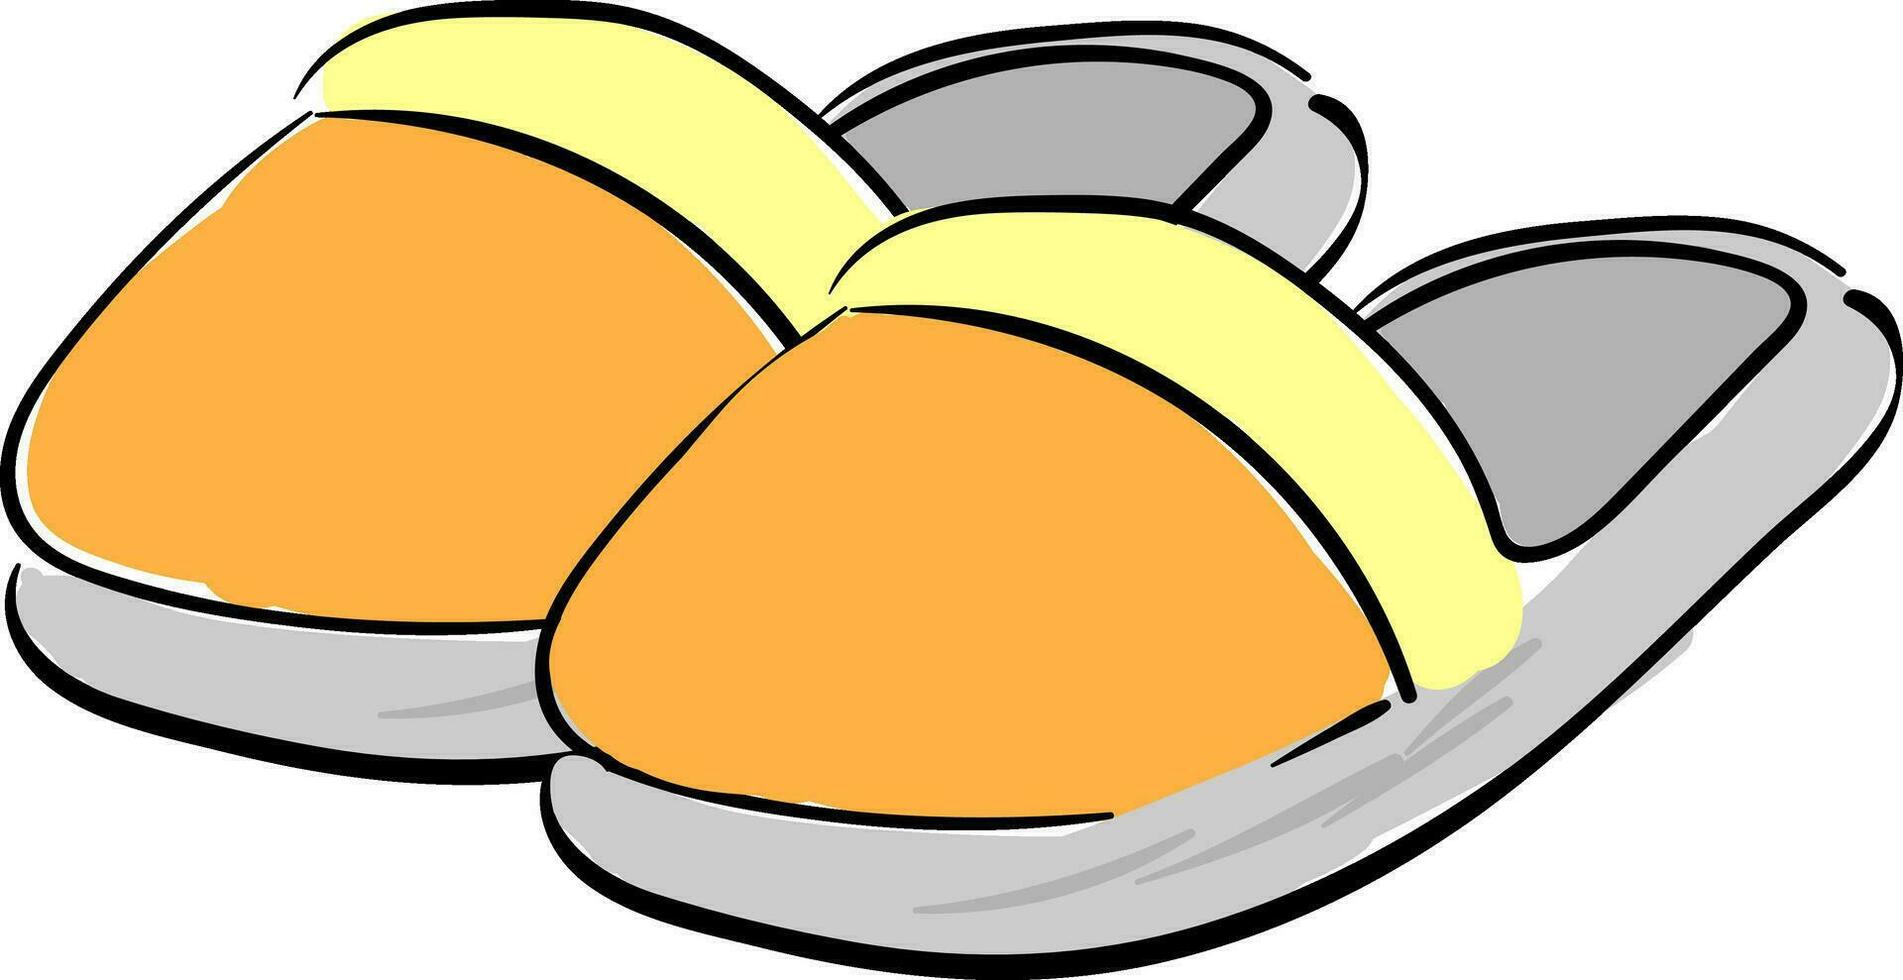 Home slippers, vector or color illustration.